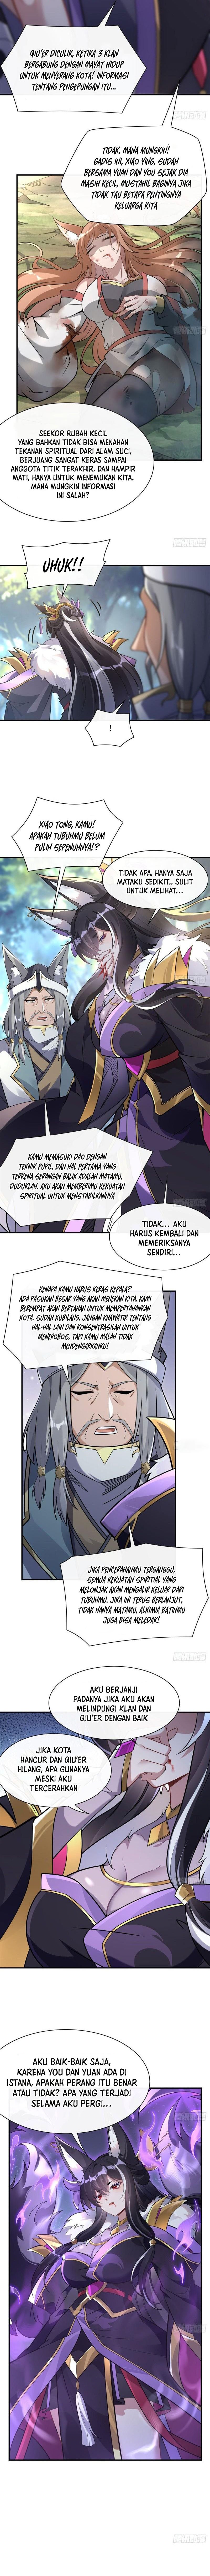 Dilarang COPAS - situs resmi www.mangacanblog.com - Komik my female apprentices are all big shots from the future 177 - chapter 177 178 Indonesia my female apprentices are all big shots from the future 177 - chapter 177 Terbaru 3|Baca Manga Komik Indonesia|Mangacan